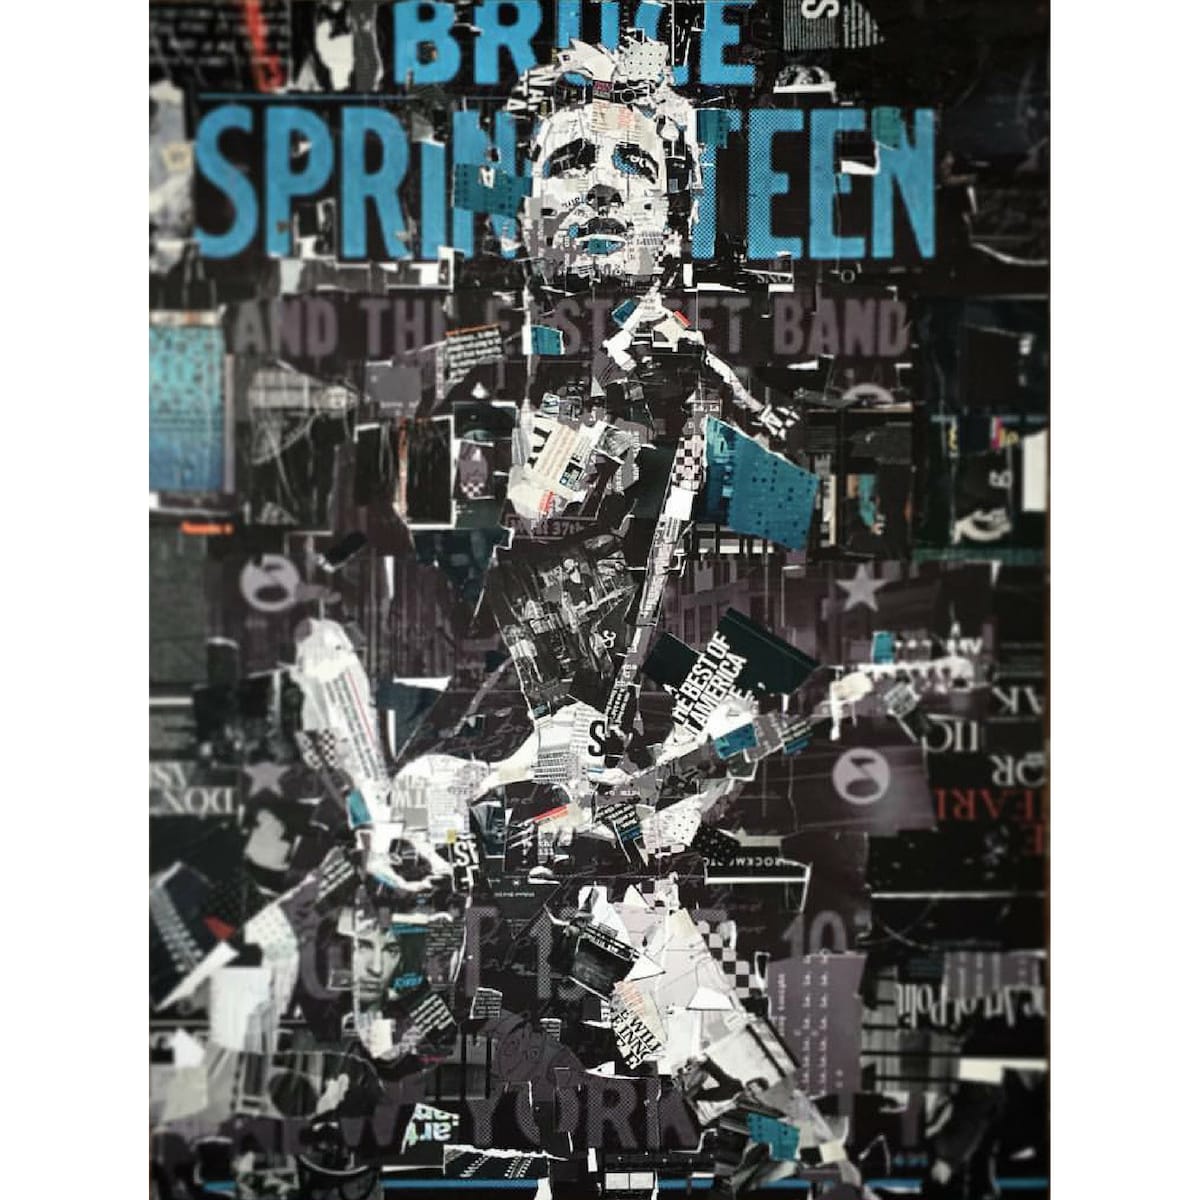 The Boss: Steppin' Out Over The Line by Derek Gores by Derek Gores Gallery 